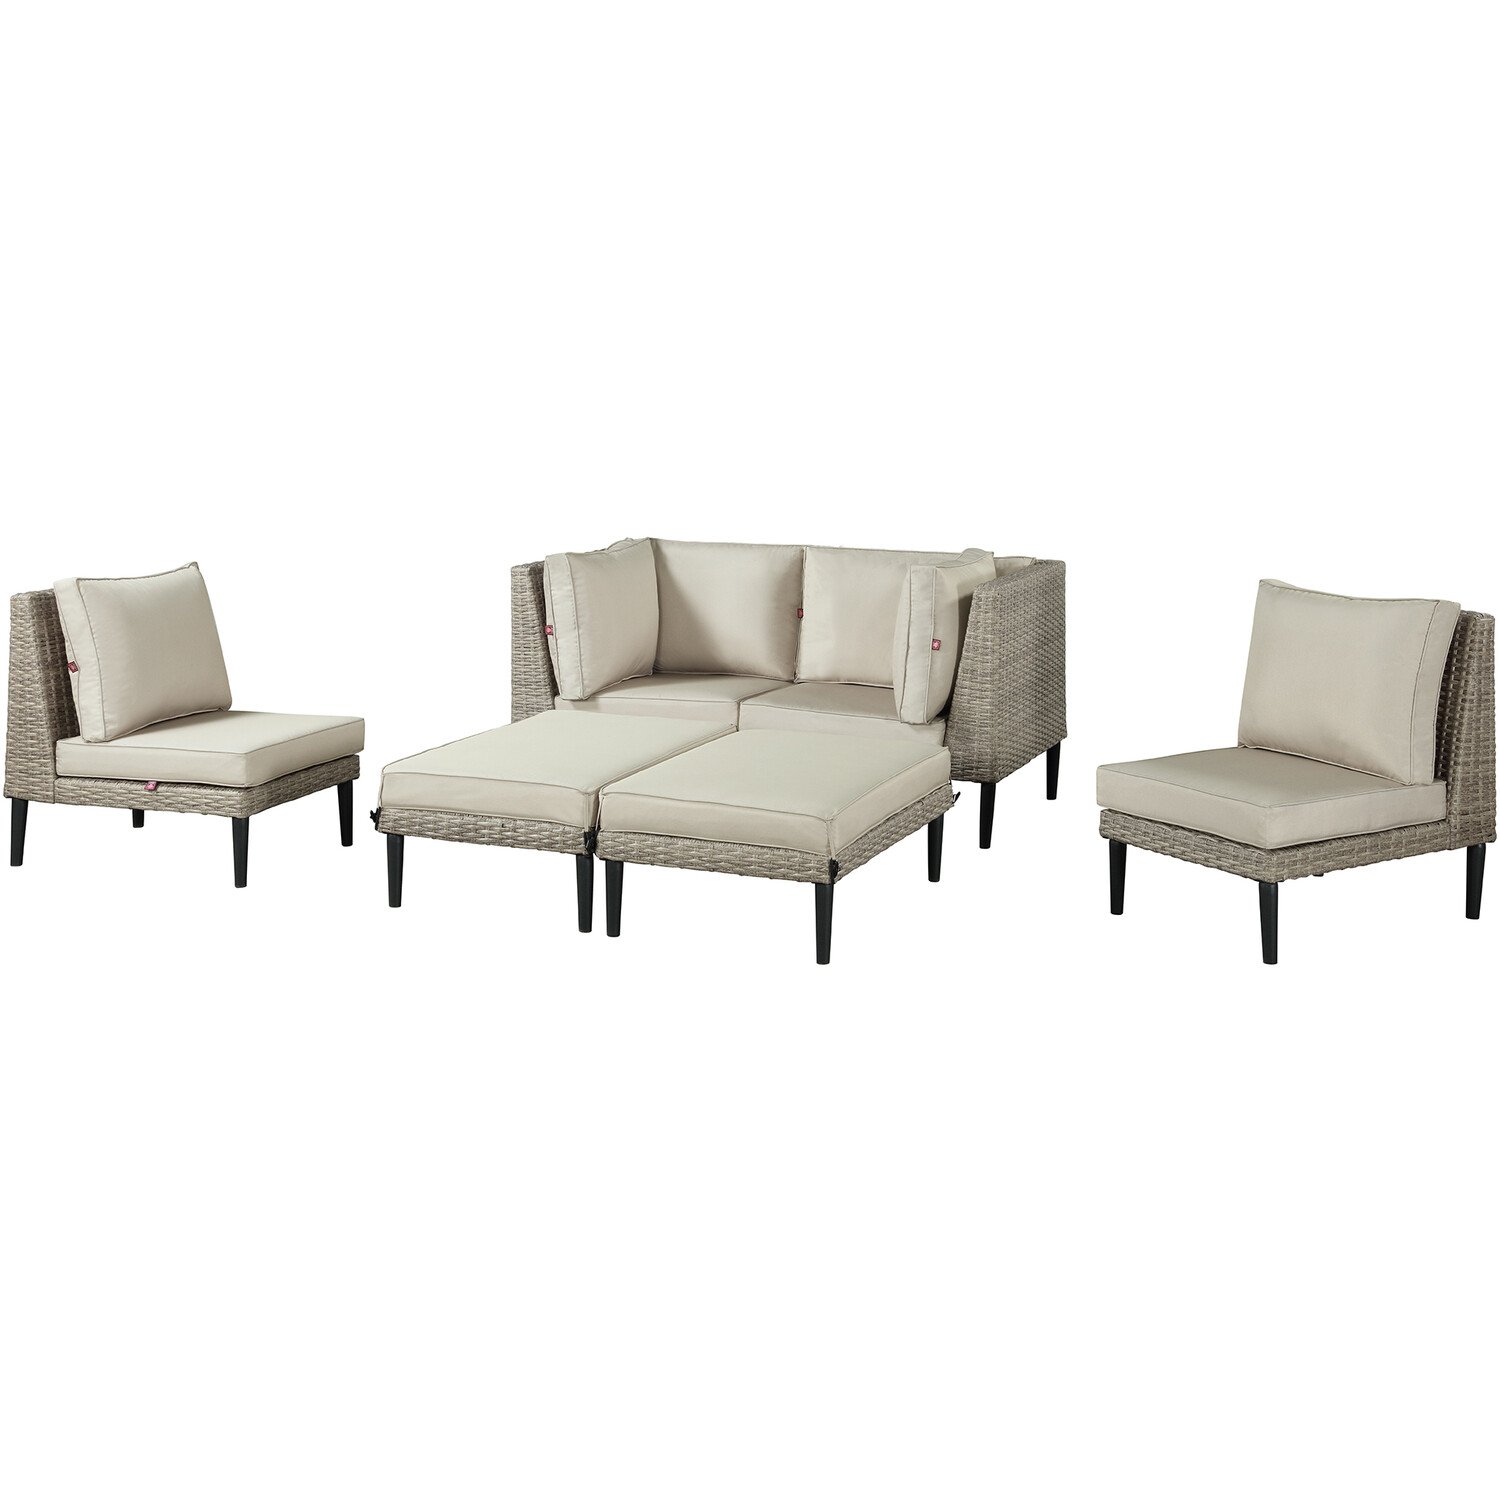 Malay Clydesdale 6 Seater Modular Sectional Corner Lounge Set Image 4